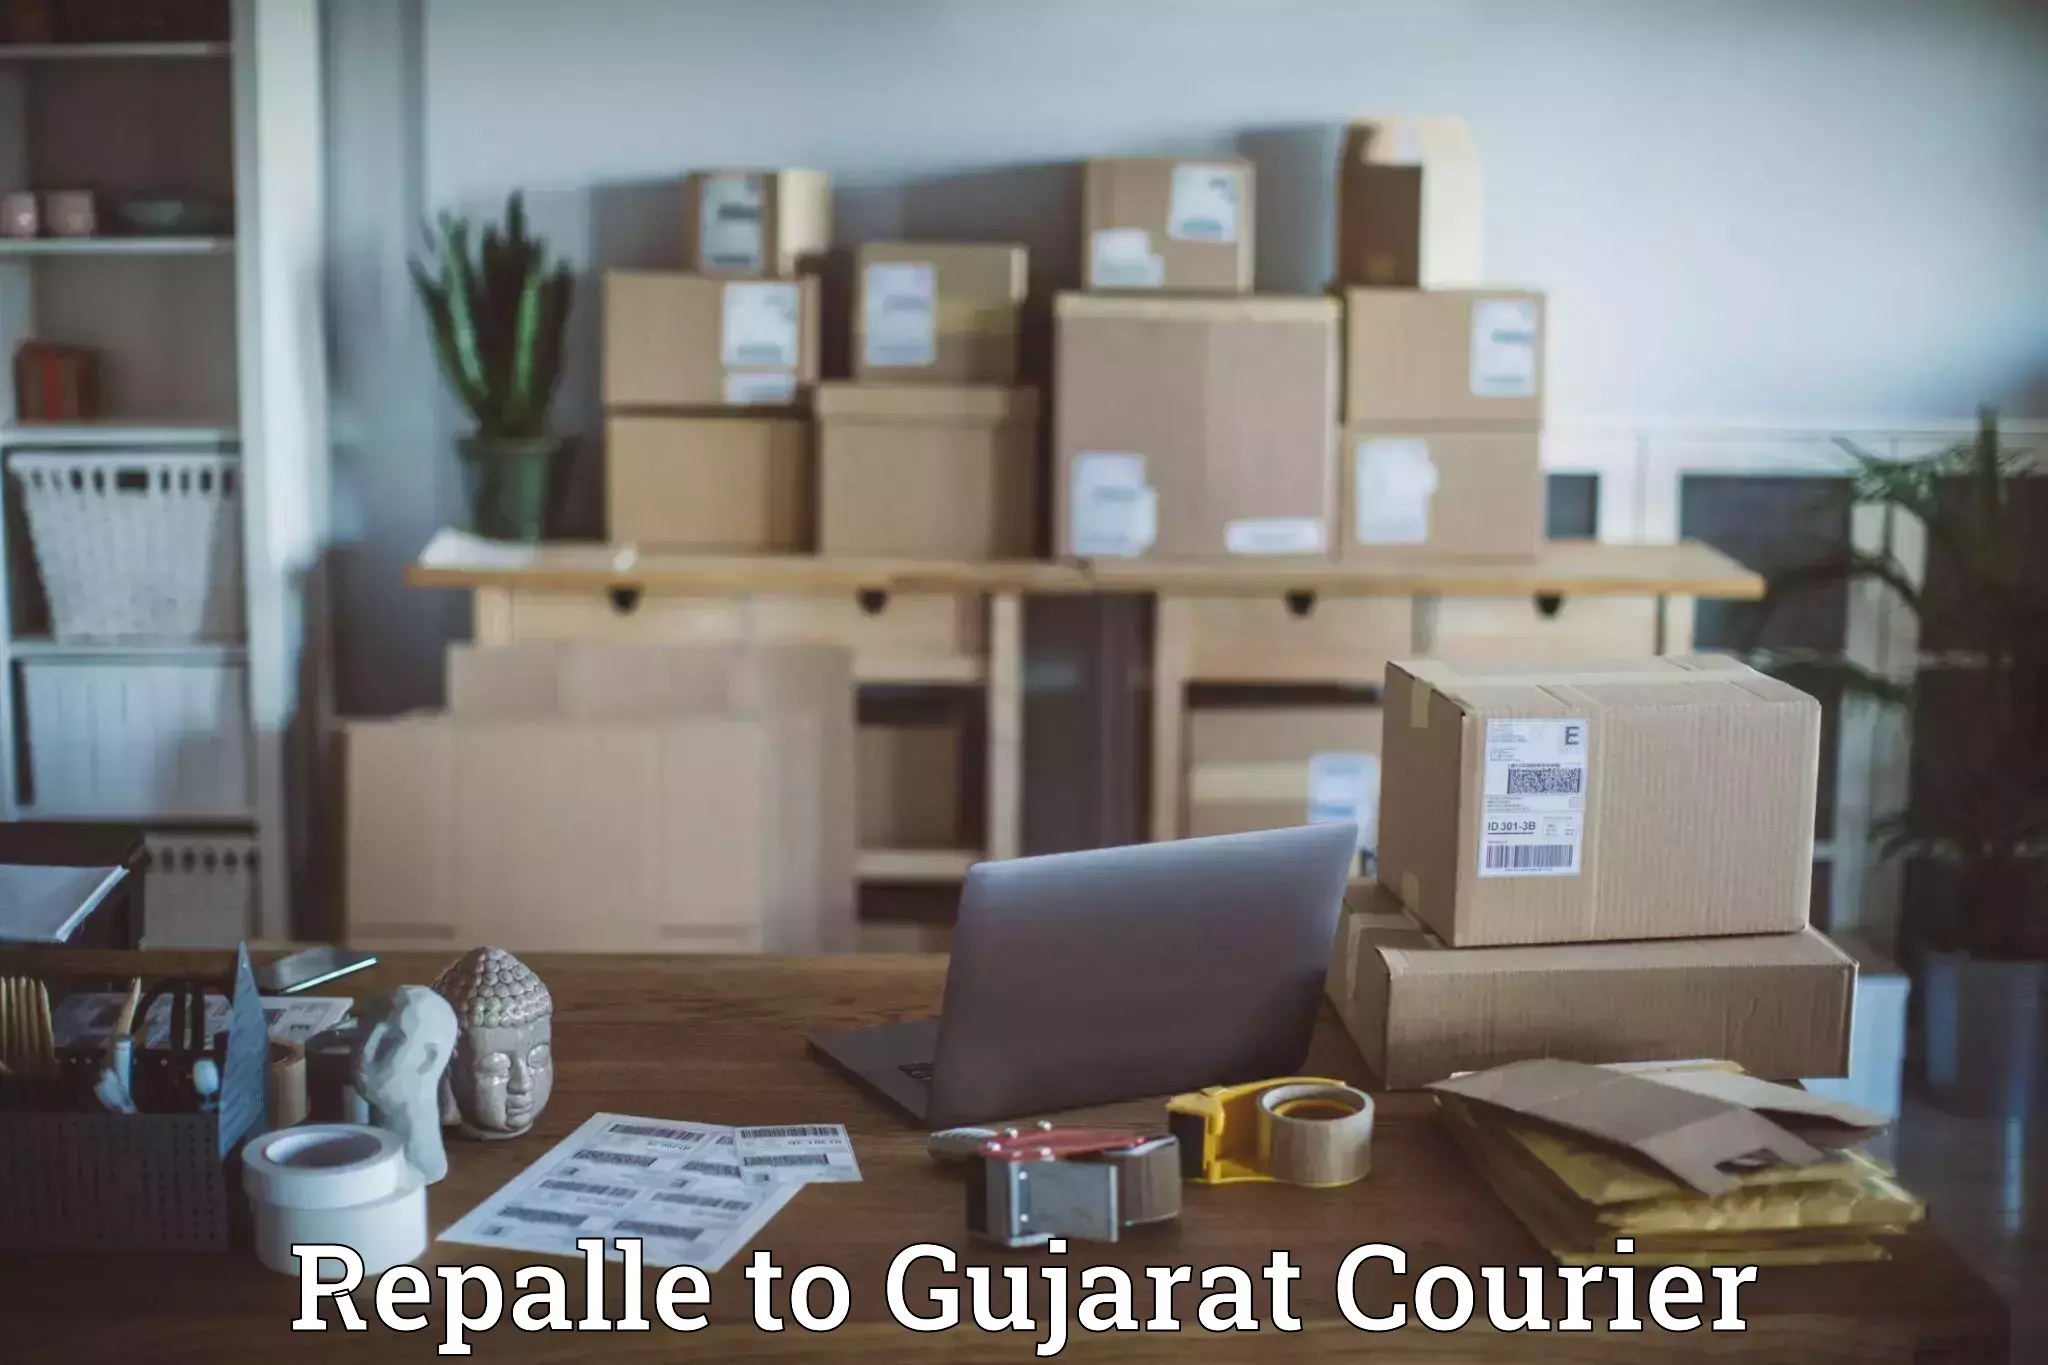 Holiday shipping services Repalle to Kalol Gujarat